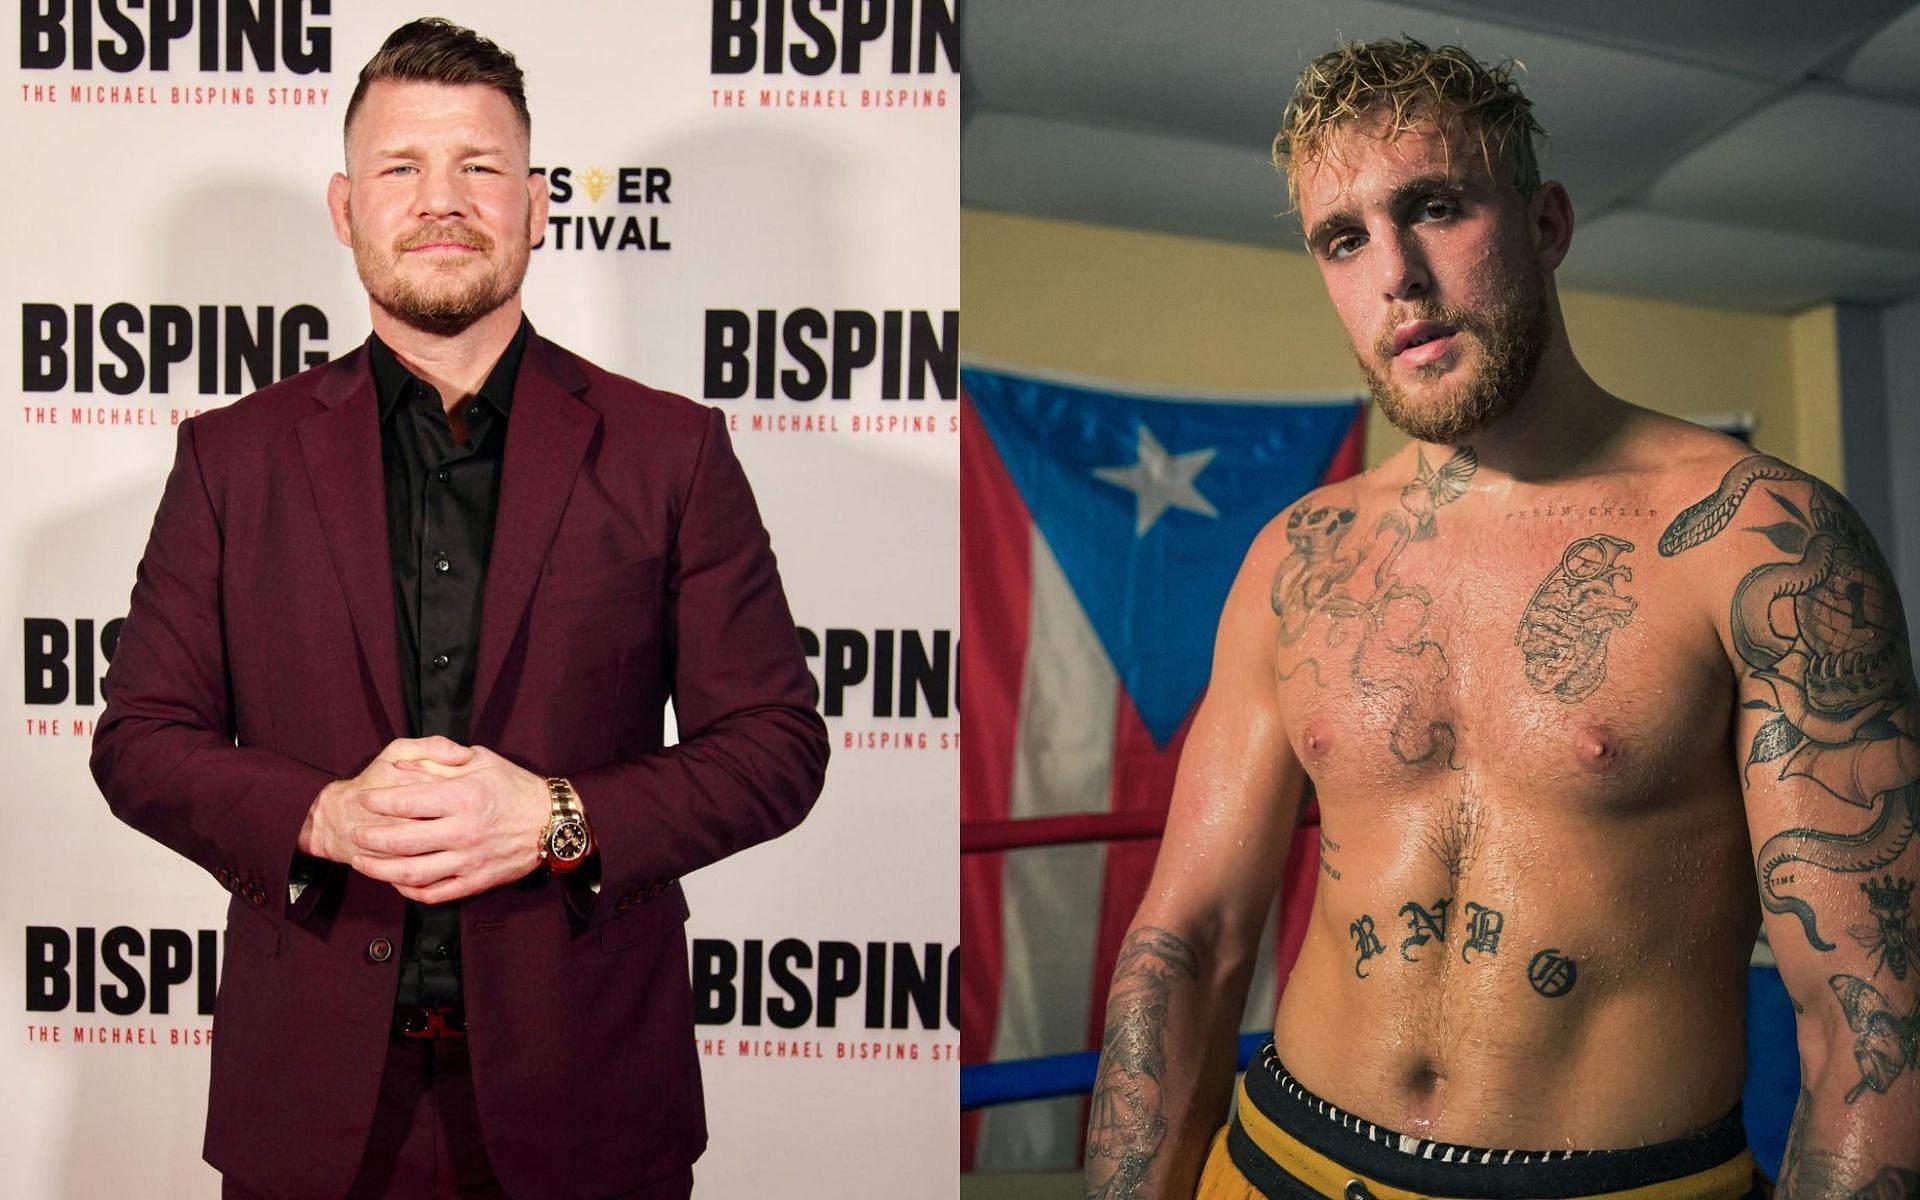 Michael Bisping (left) and Jake Paul (right) [Images Courtesy @mikebisping and @jakepaul Instagram]